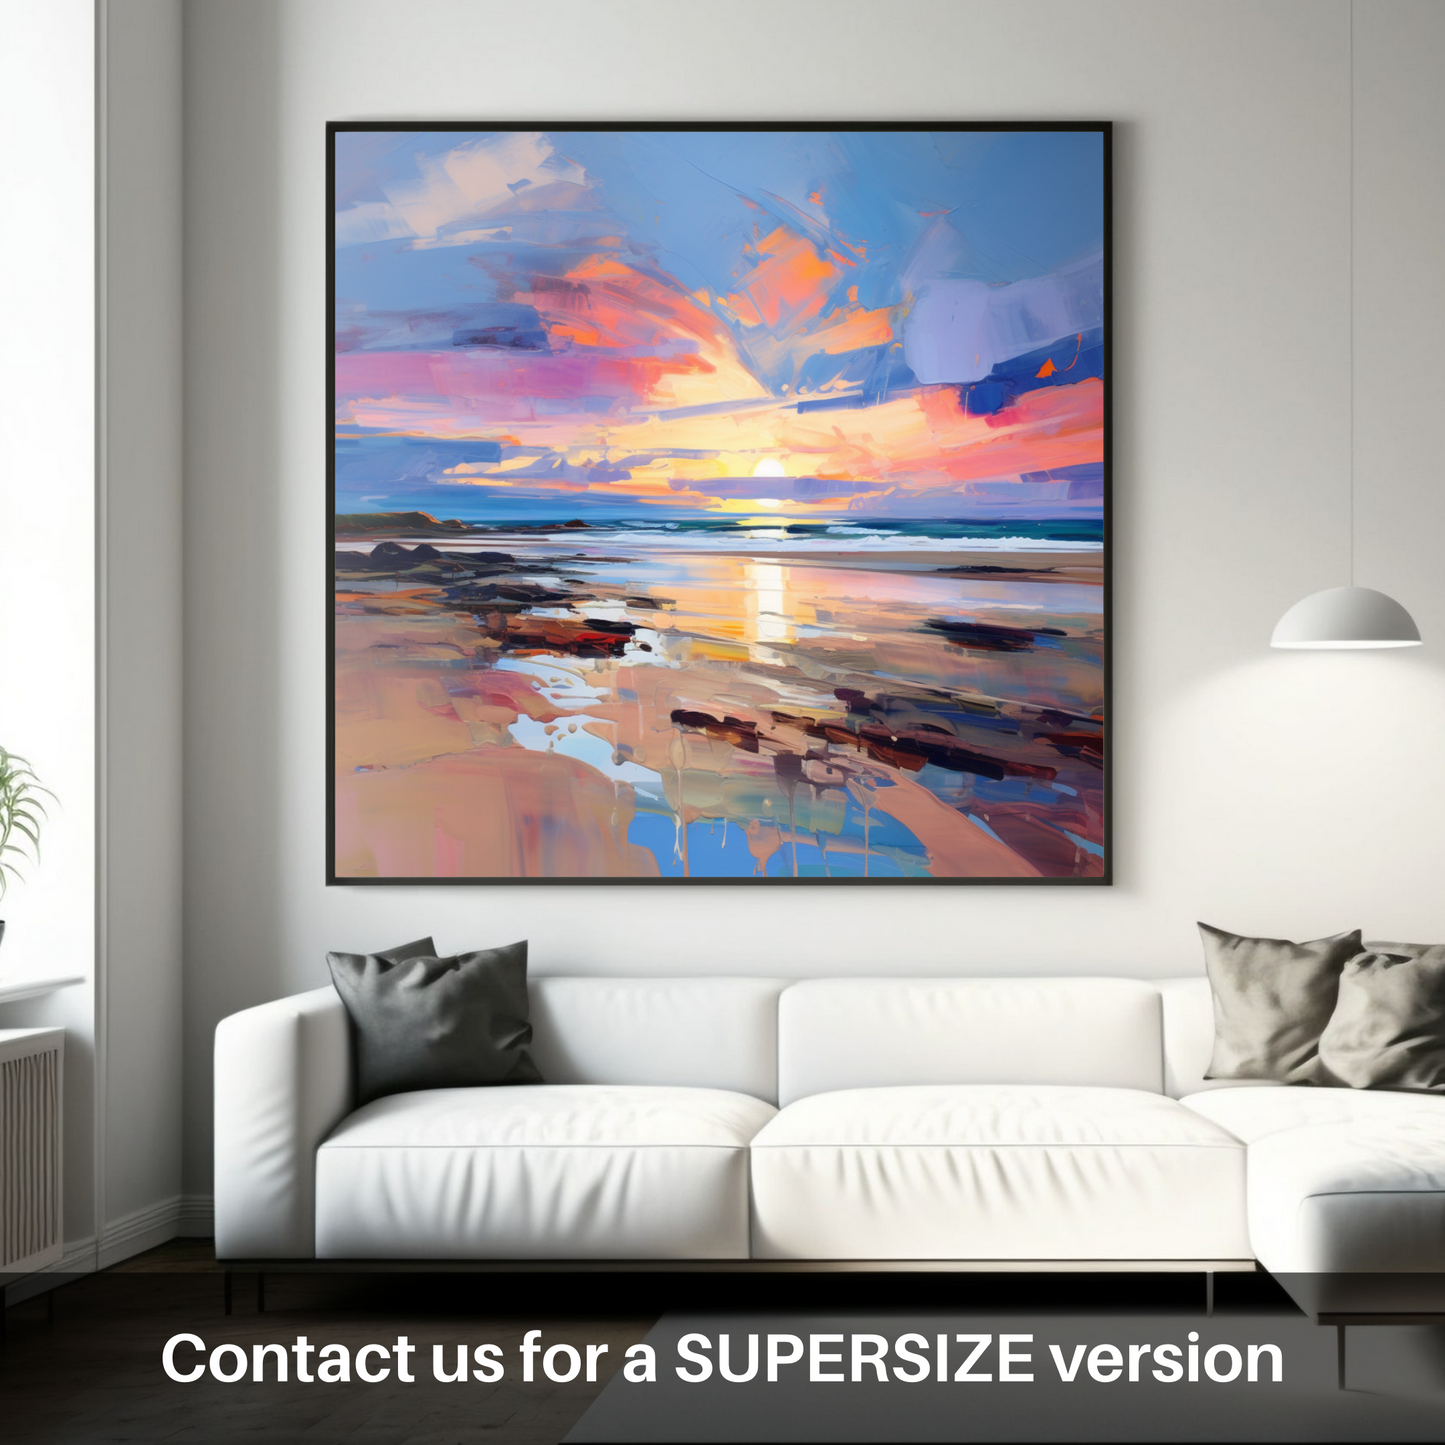 Huge supersize print of St Cyrus Beach at sunset